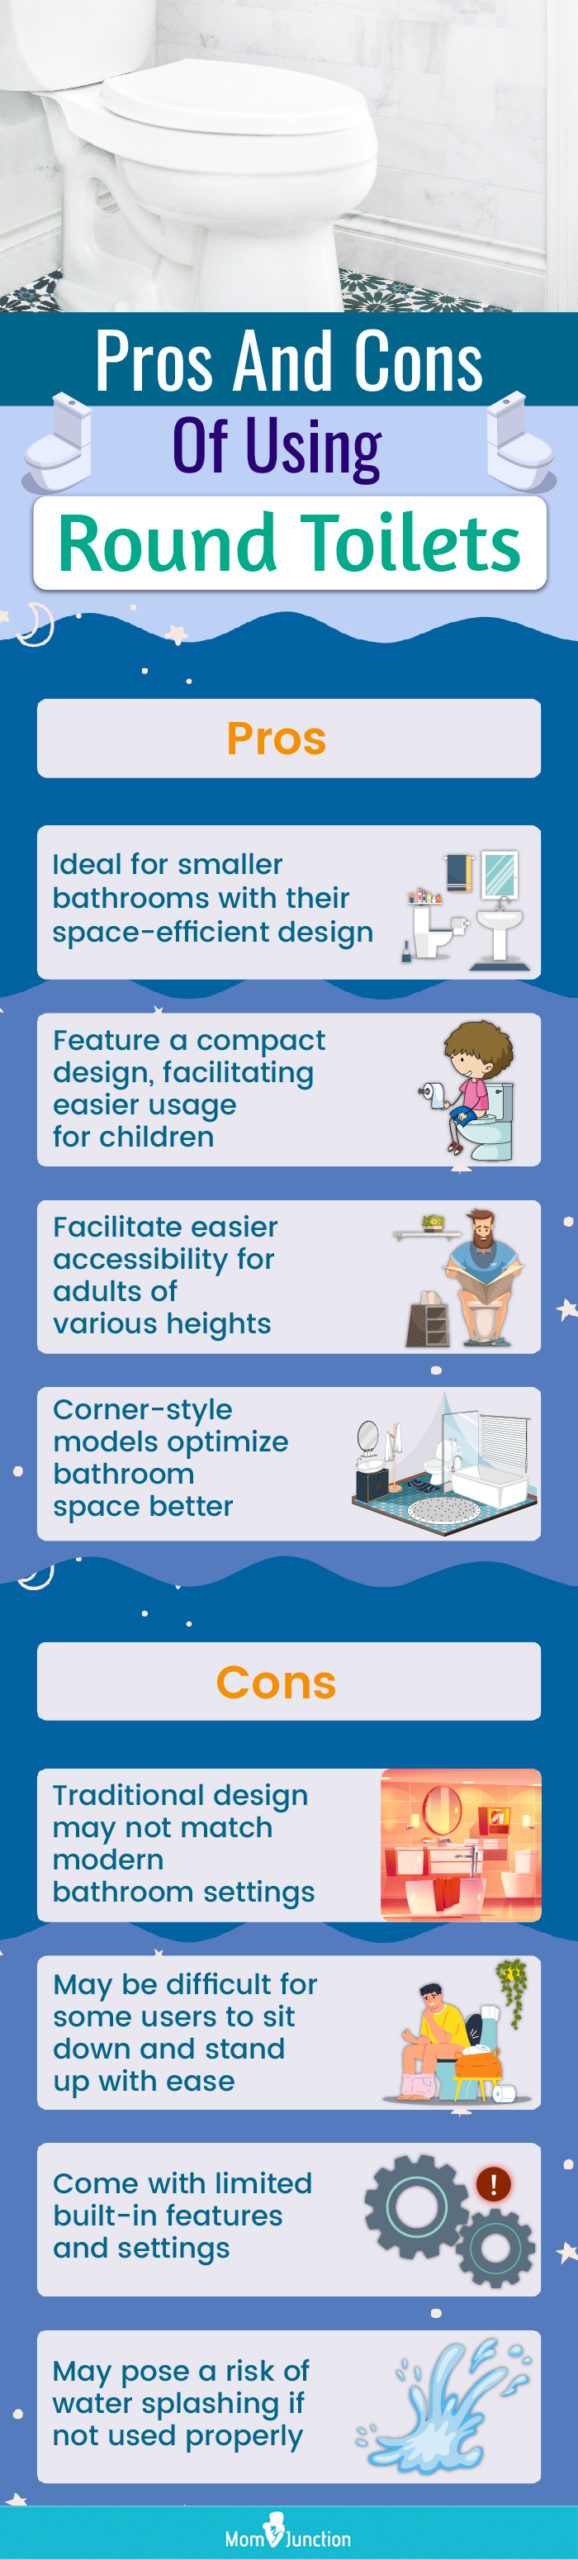 Pros And Cons Of Using Round Toilets (infographic)